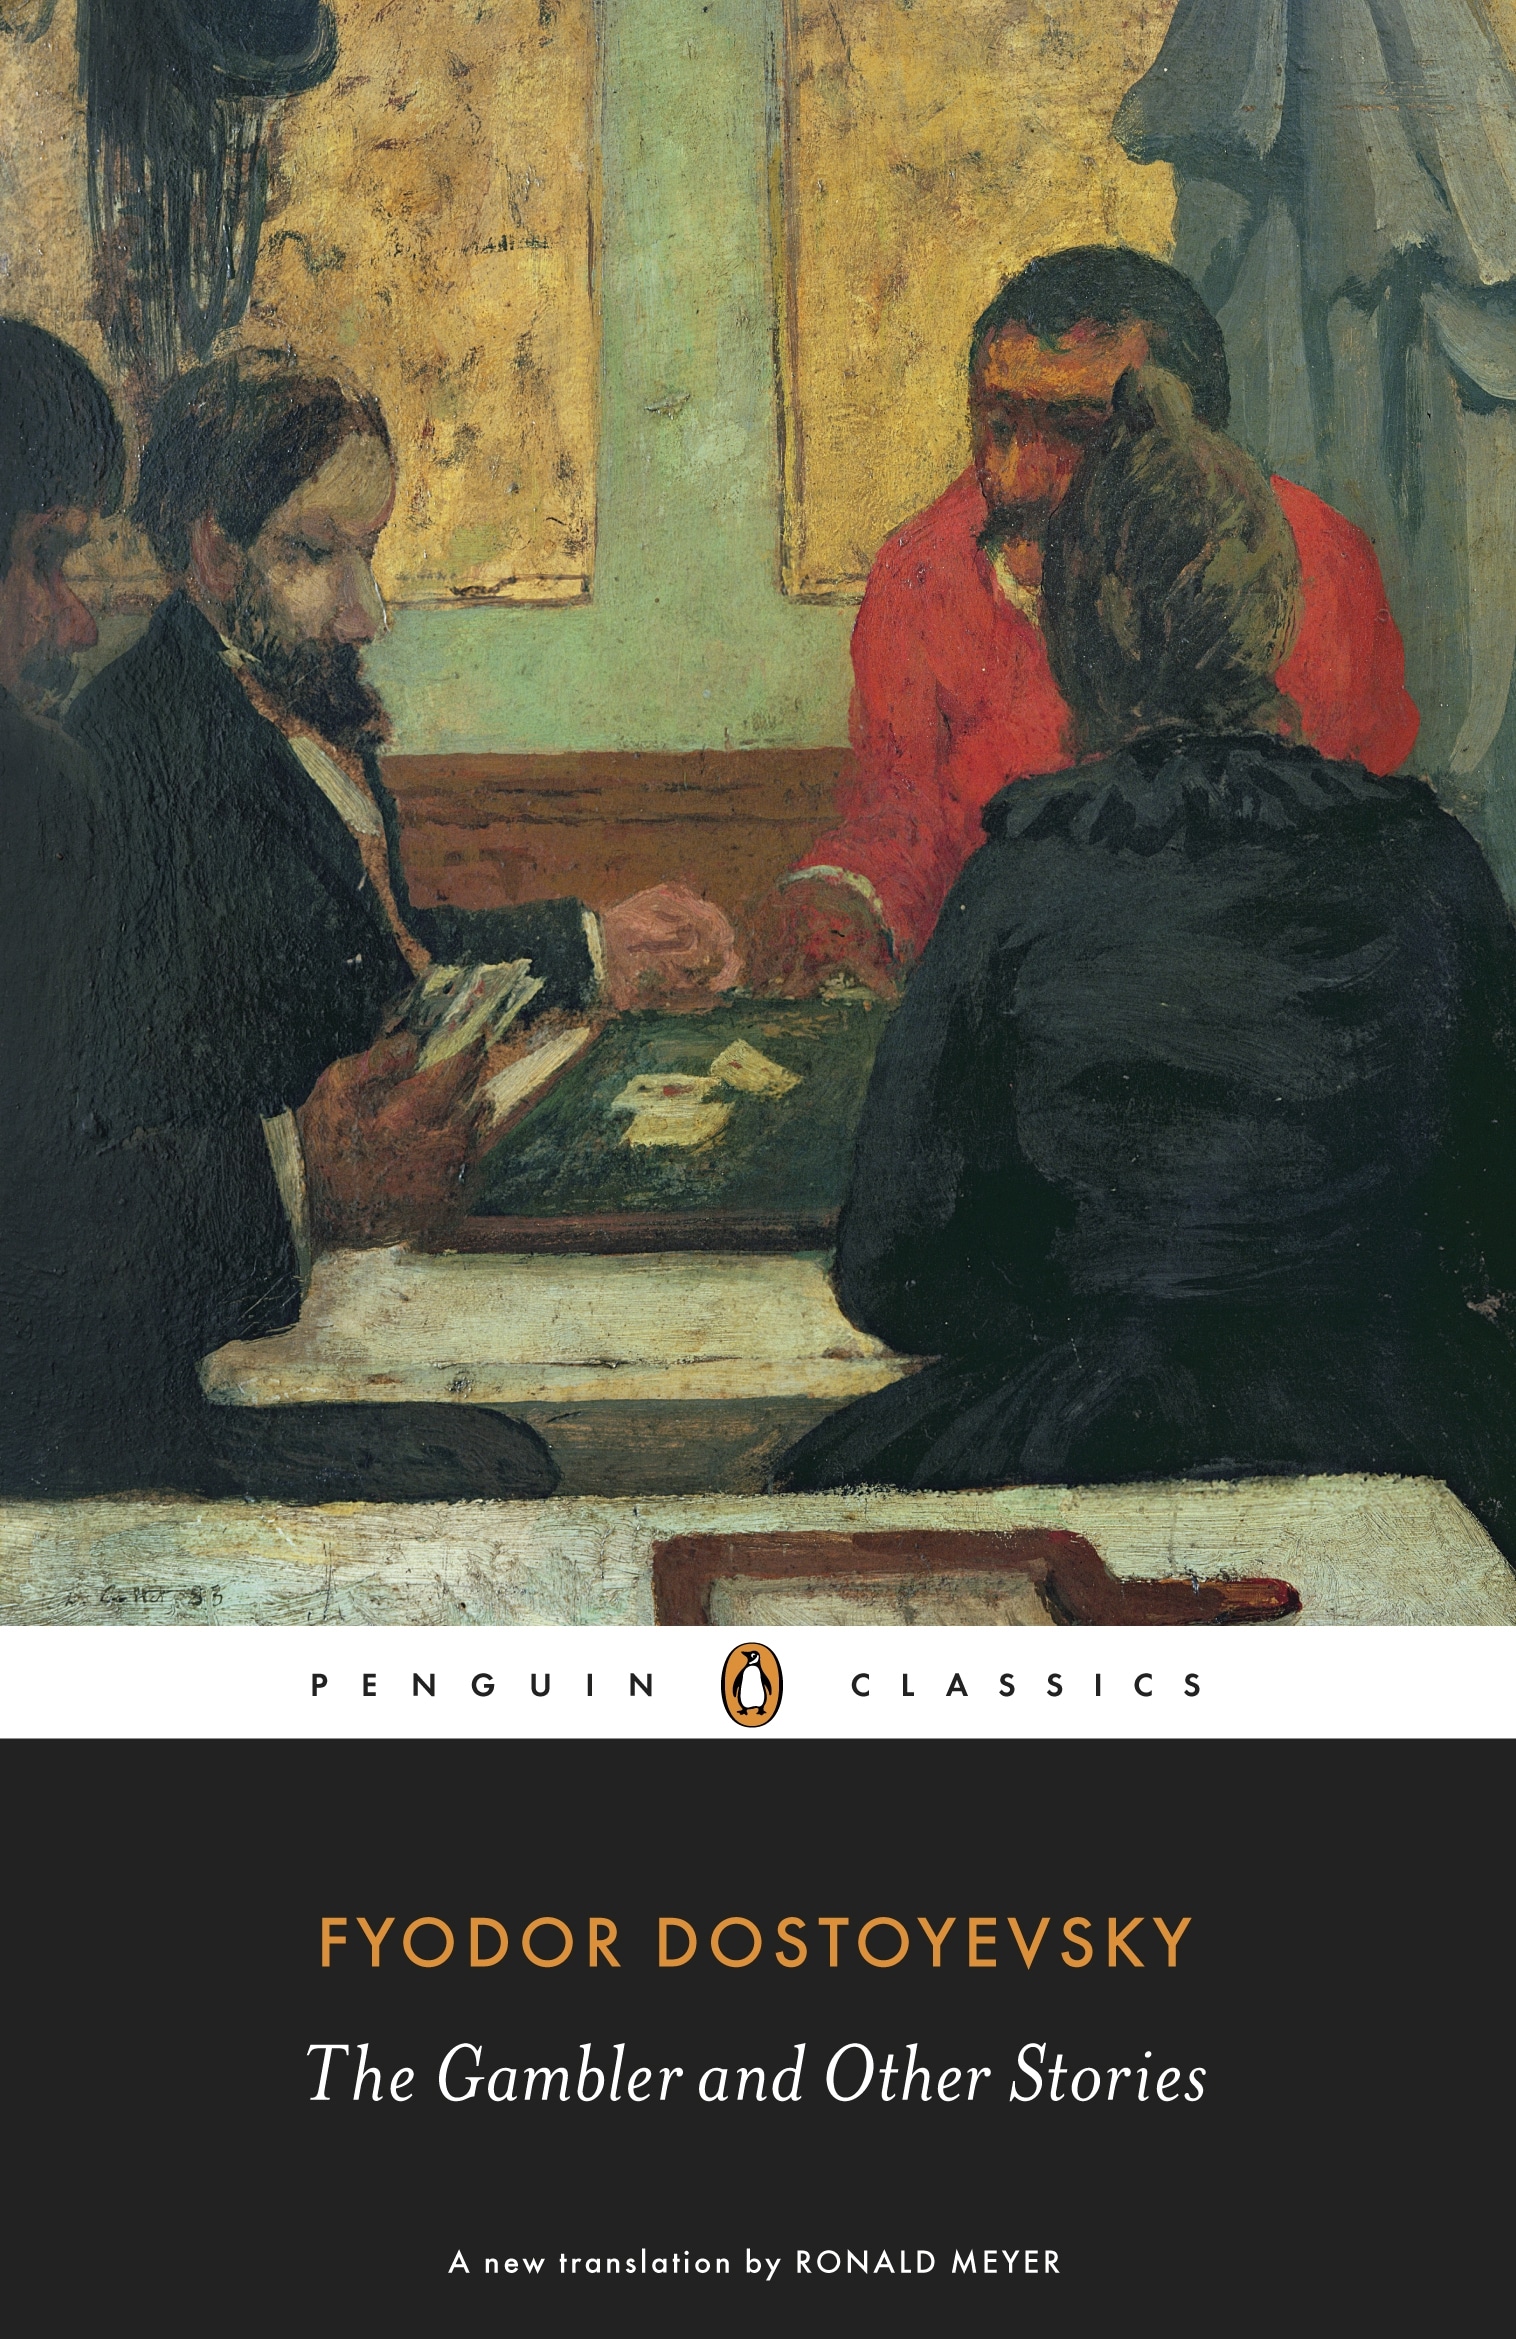 Book “The Gambler and Other Stories” by Fyodor Dostoyevsky — July 1, 2010